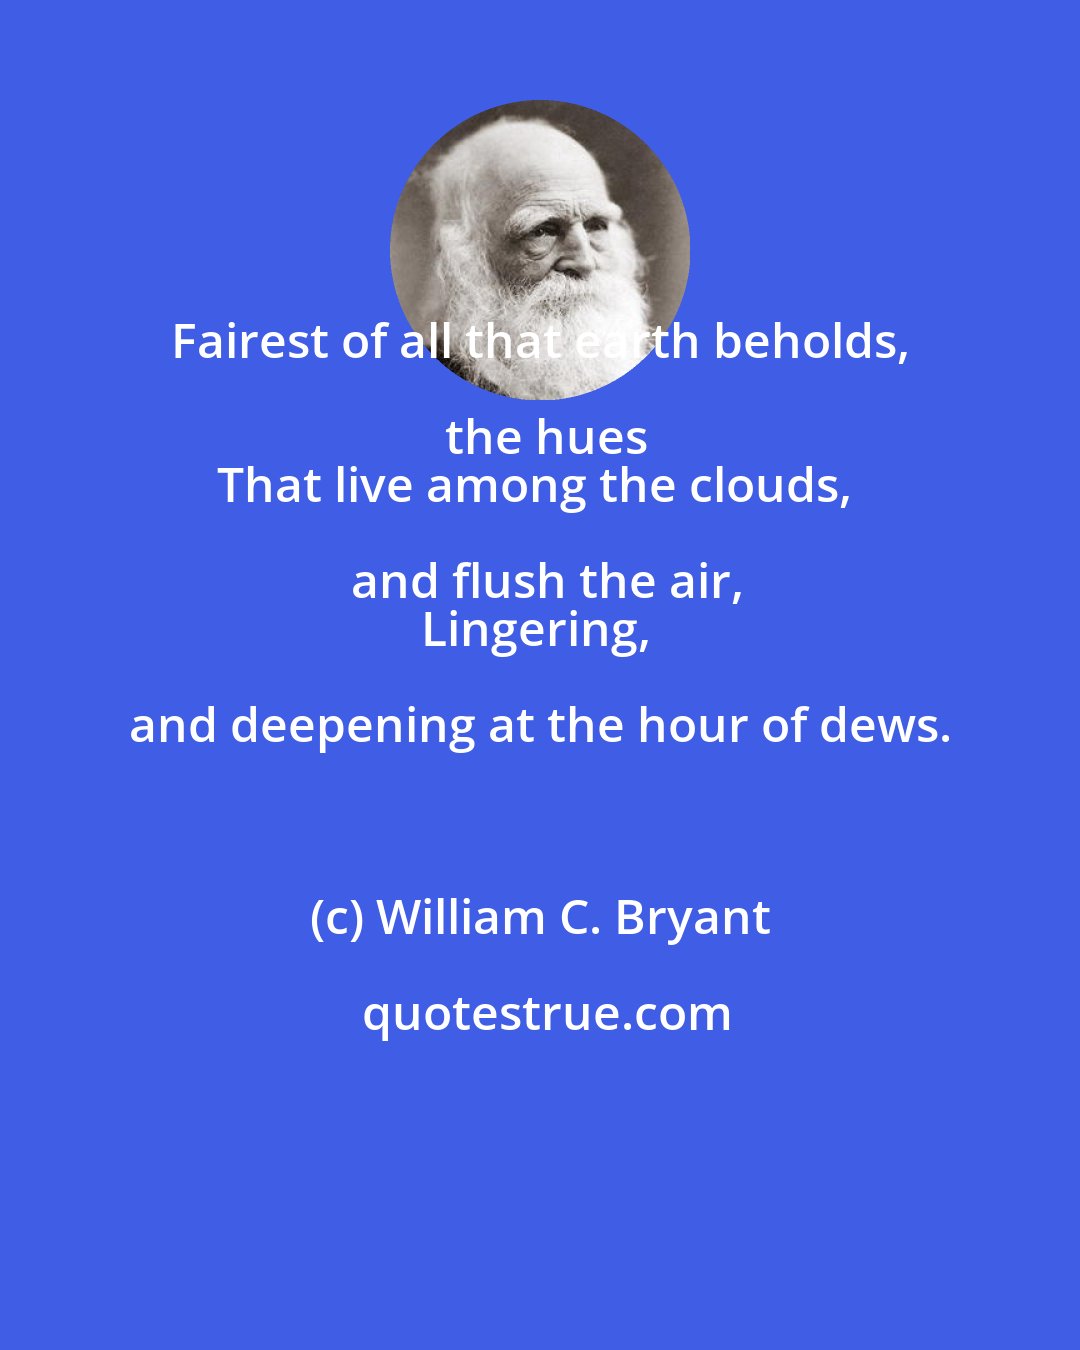 William C. Bryant: Fairest of all that earth beholds, the hues
That live among the clouds, and flush the air,
Lingering, and deepening at the hour of dews.